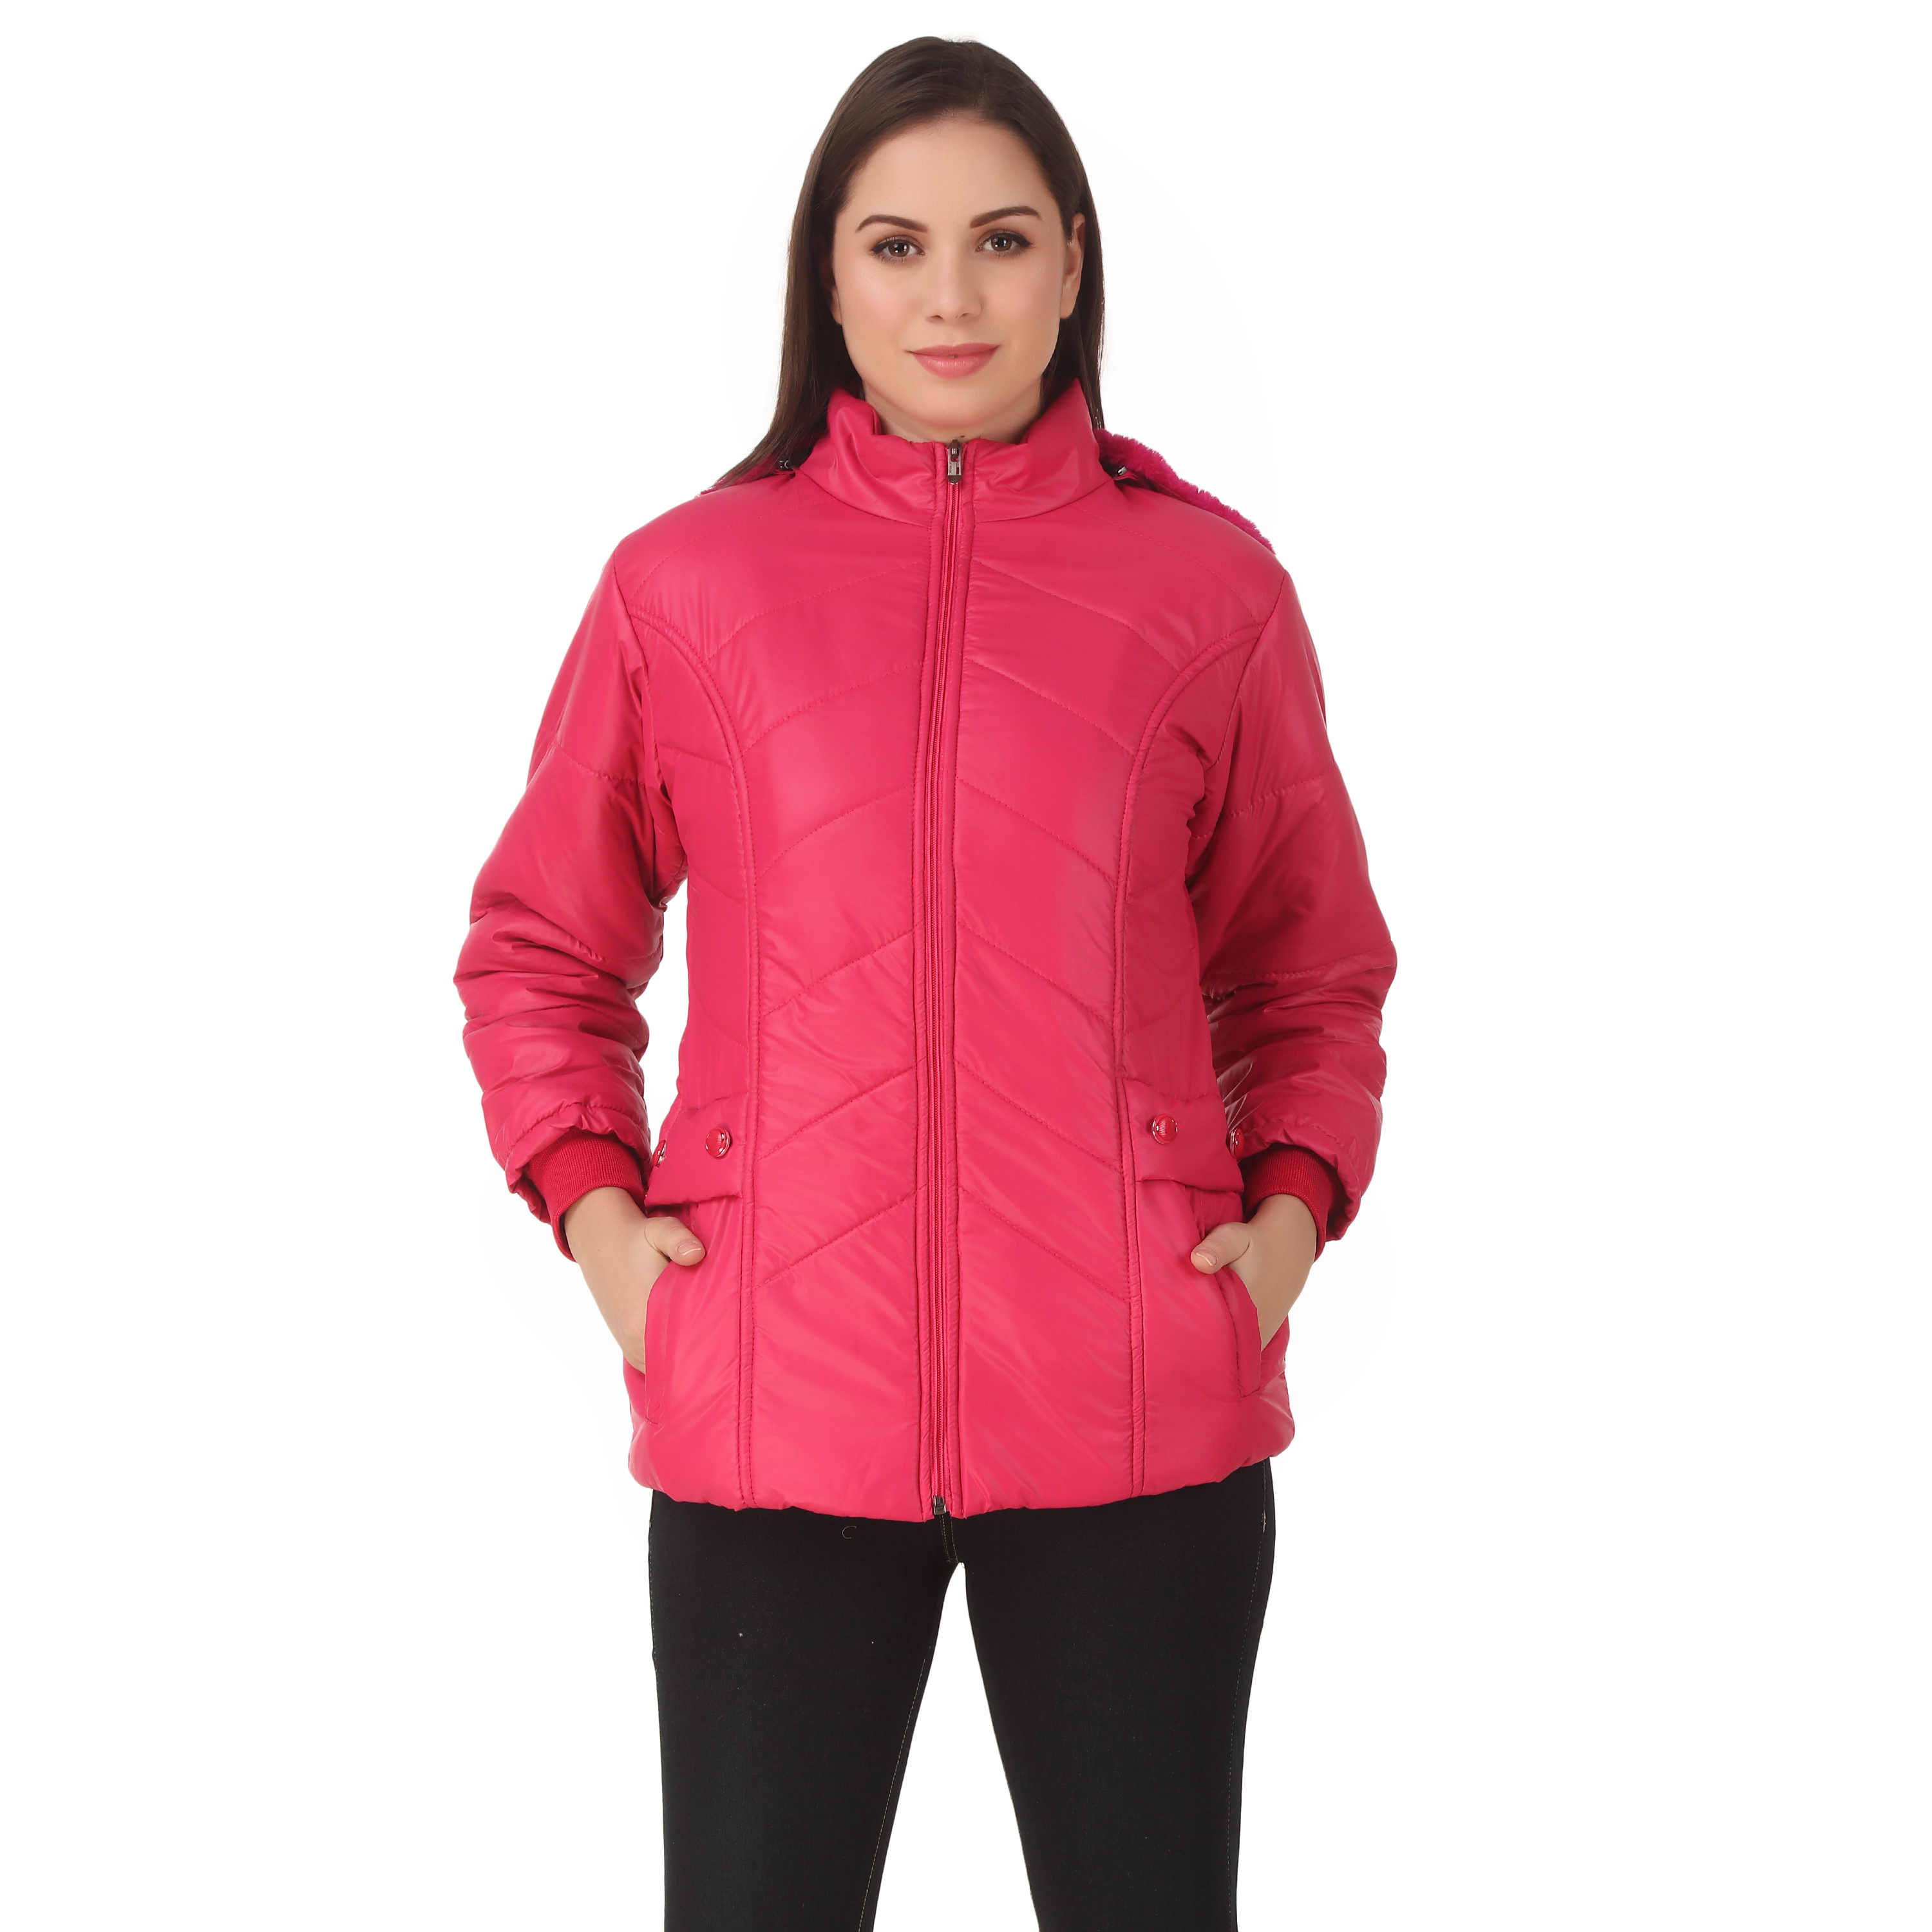 Full Sleeve Quilted Jacket for Women's (Pink)